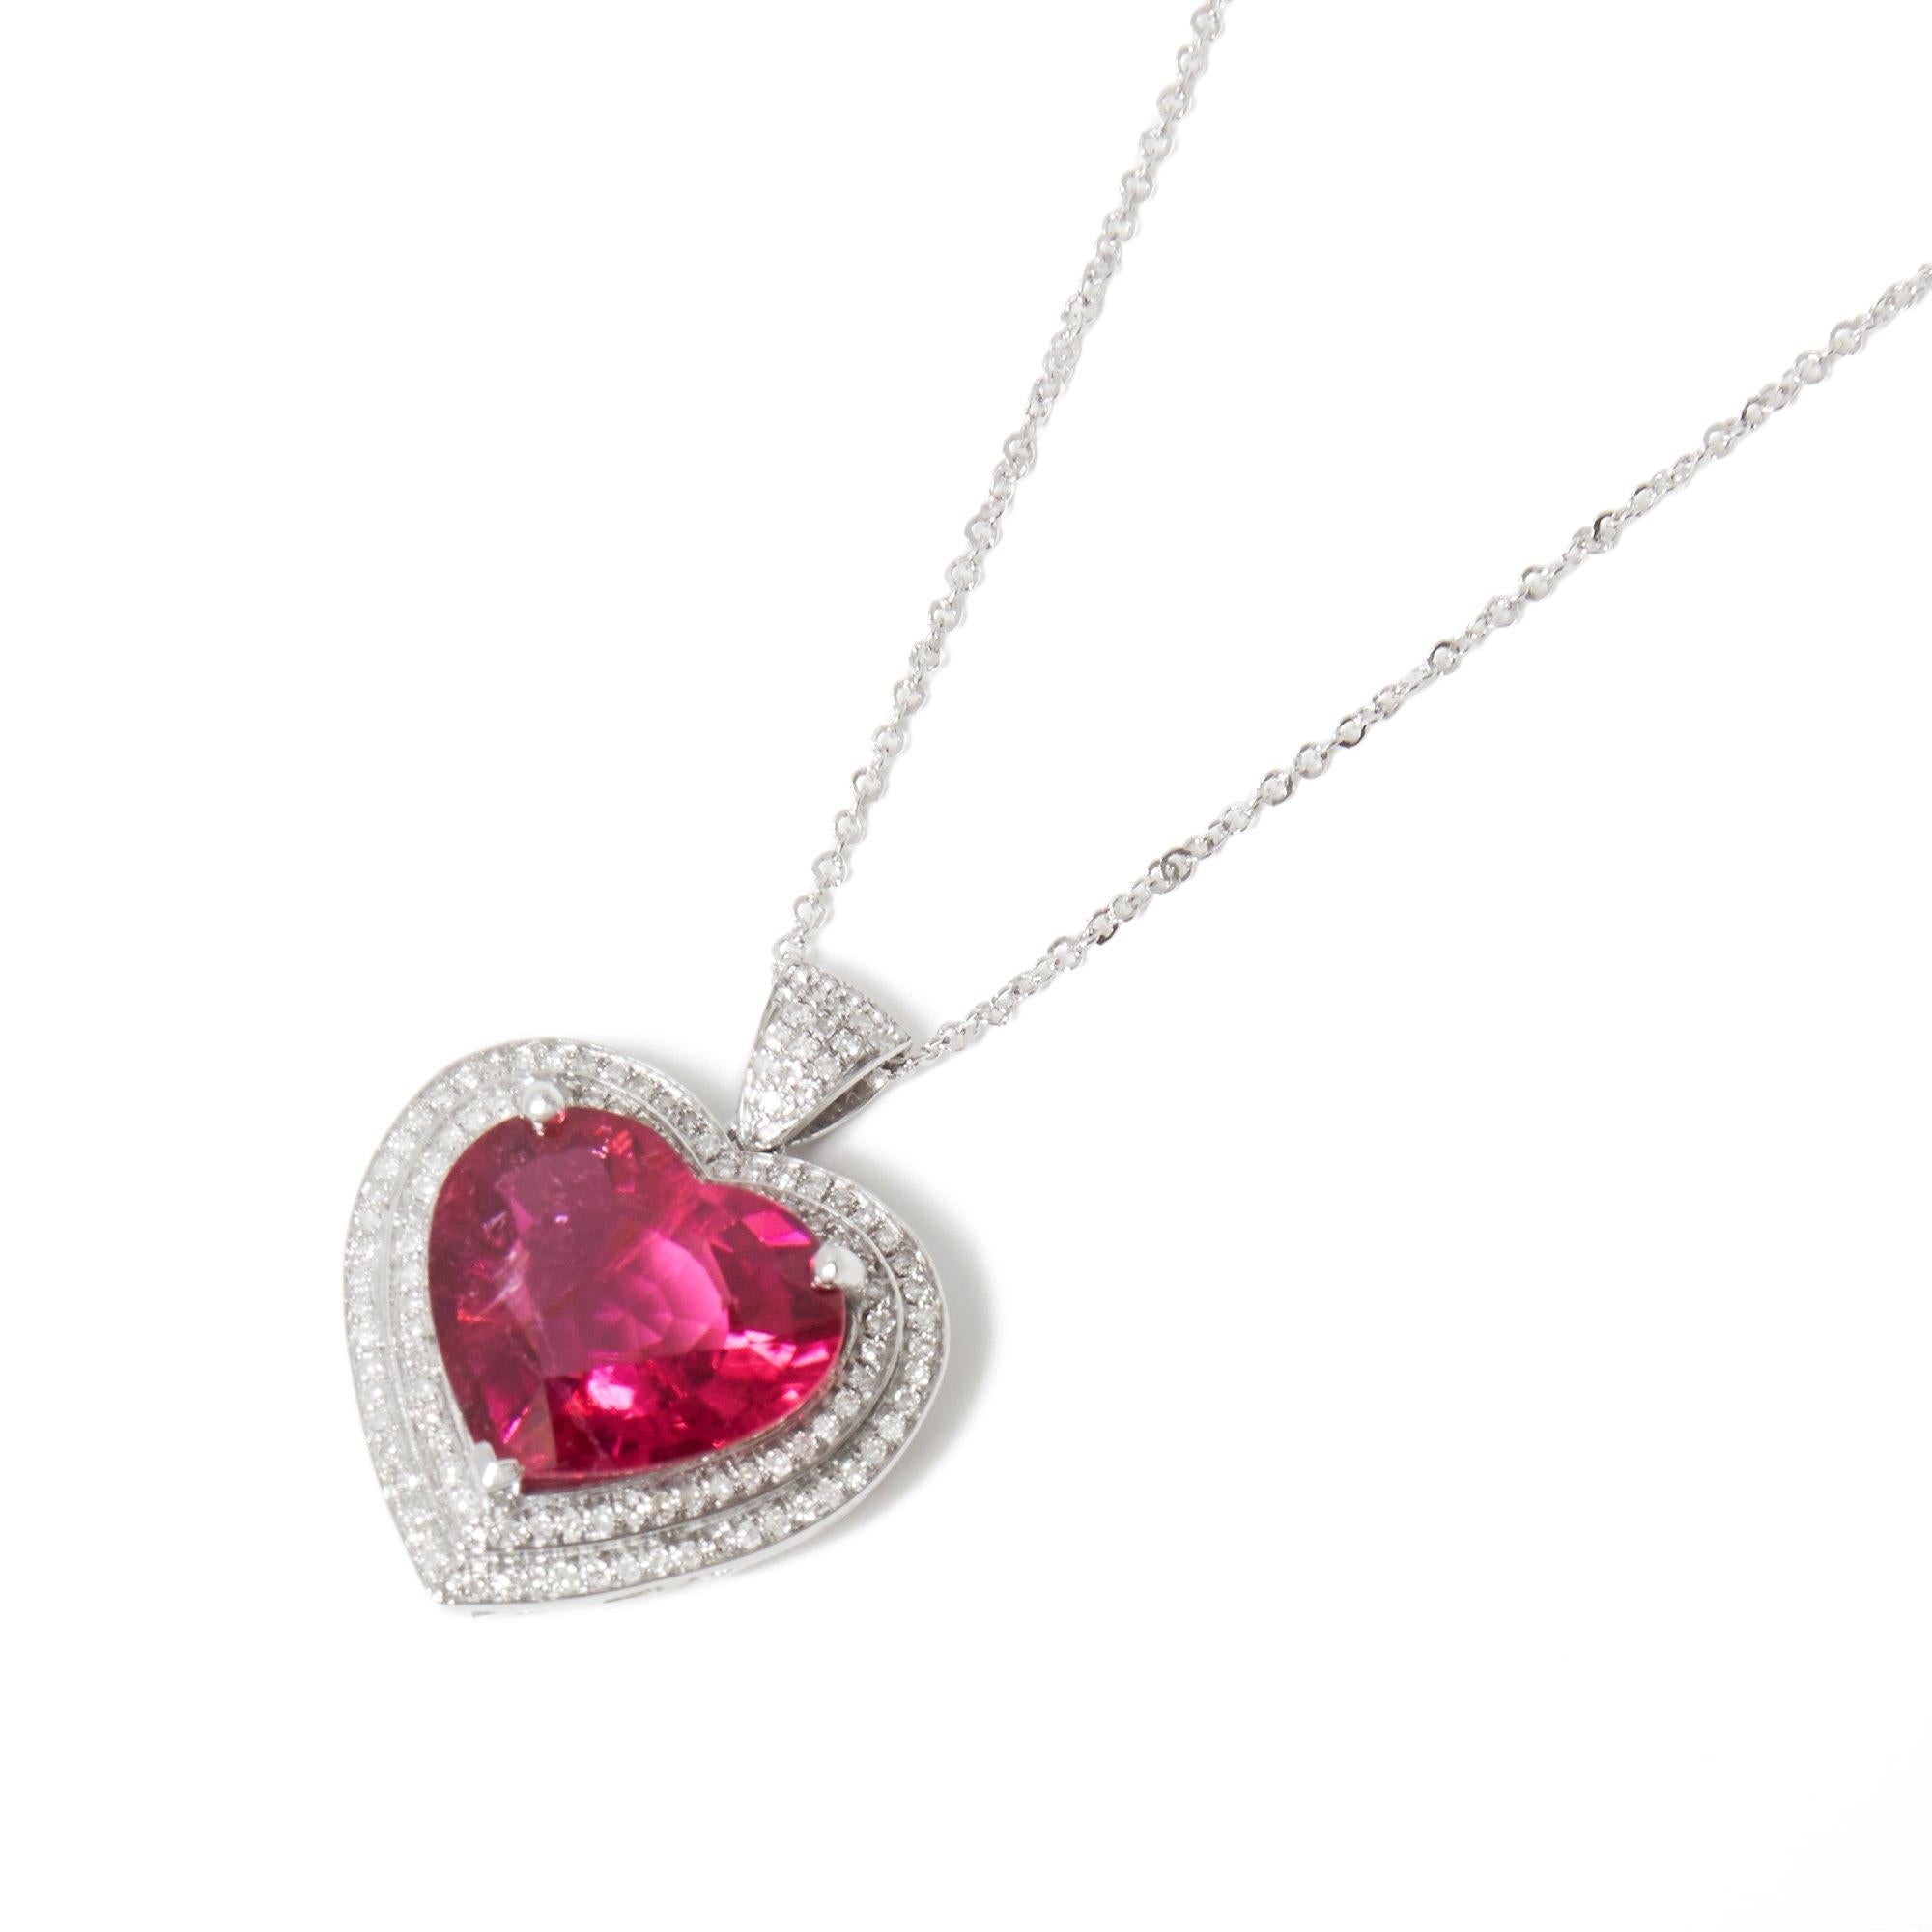 This Pendant Designed by David Jerome is from his Private Collection and features One Heart Cut Rubellite Tourmaline totalling 8.84cts Sourced in Brazil. Set with Round Brilliant Cut Diamonds totalling 0.50cts Mounted in an 18k White Gold Setting